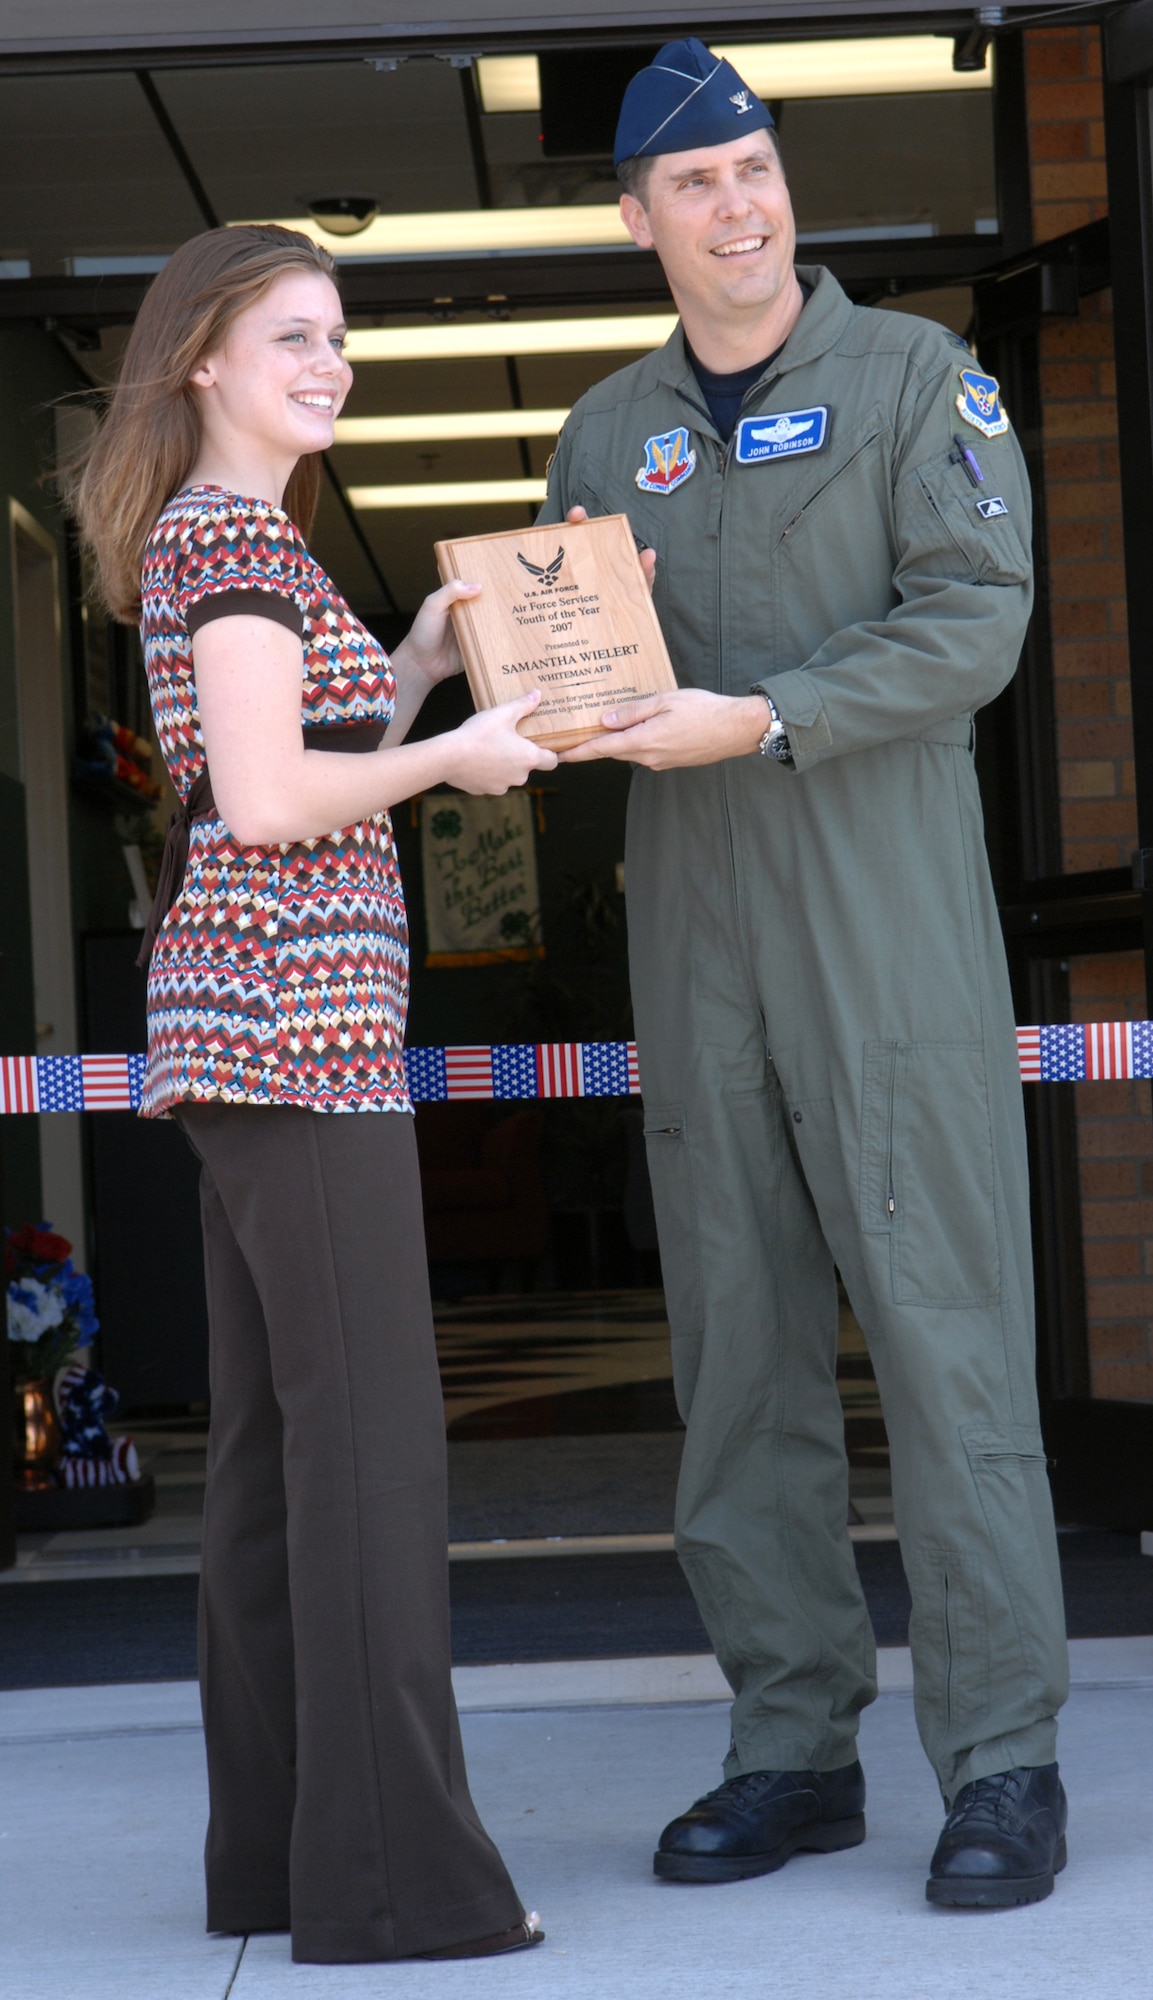 WHITEMAN AIR FORCE BASE, Mo. – Col. John Robinson, 509th Bomb Wing vice commander gives the 2007 Air Force Services Youth of the Year Award to Samantha Wielert at the youth center ribbon cutting ceremony Aug. 24. The youth center programs include before and after school care, youth sports and fitness and youth development and recreation programs for youth ages 5-18 years of age. (U.S. Air Force photo/Airman 1st Class Stephen Linch)

